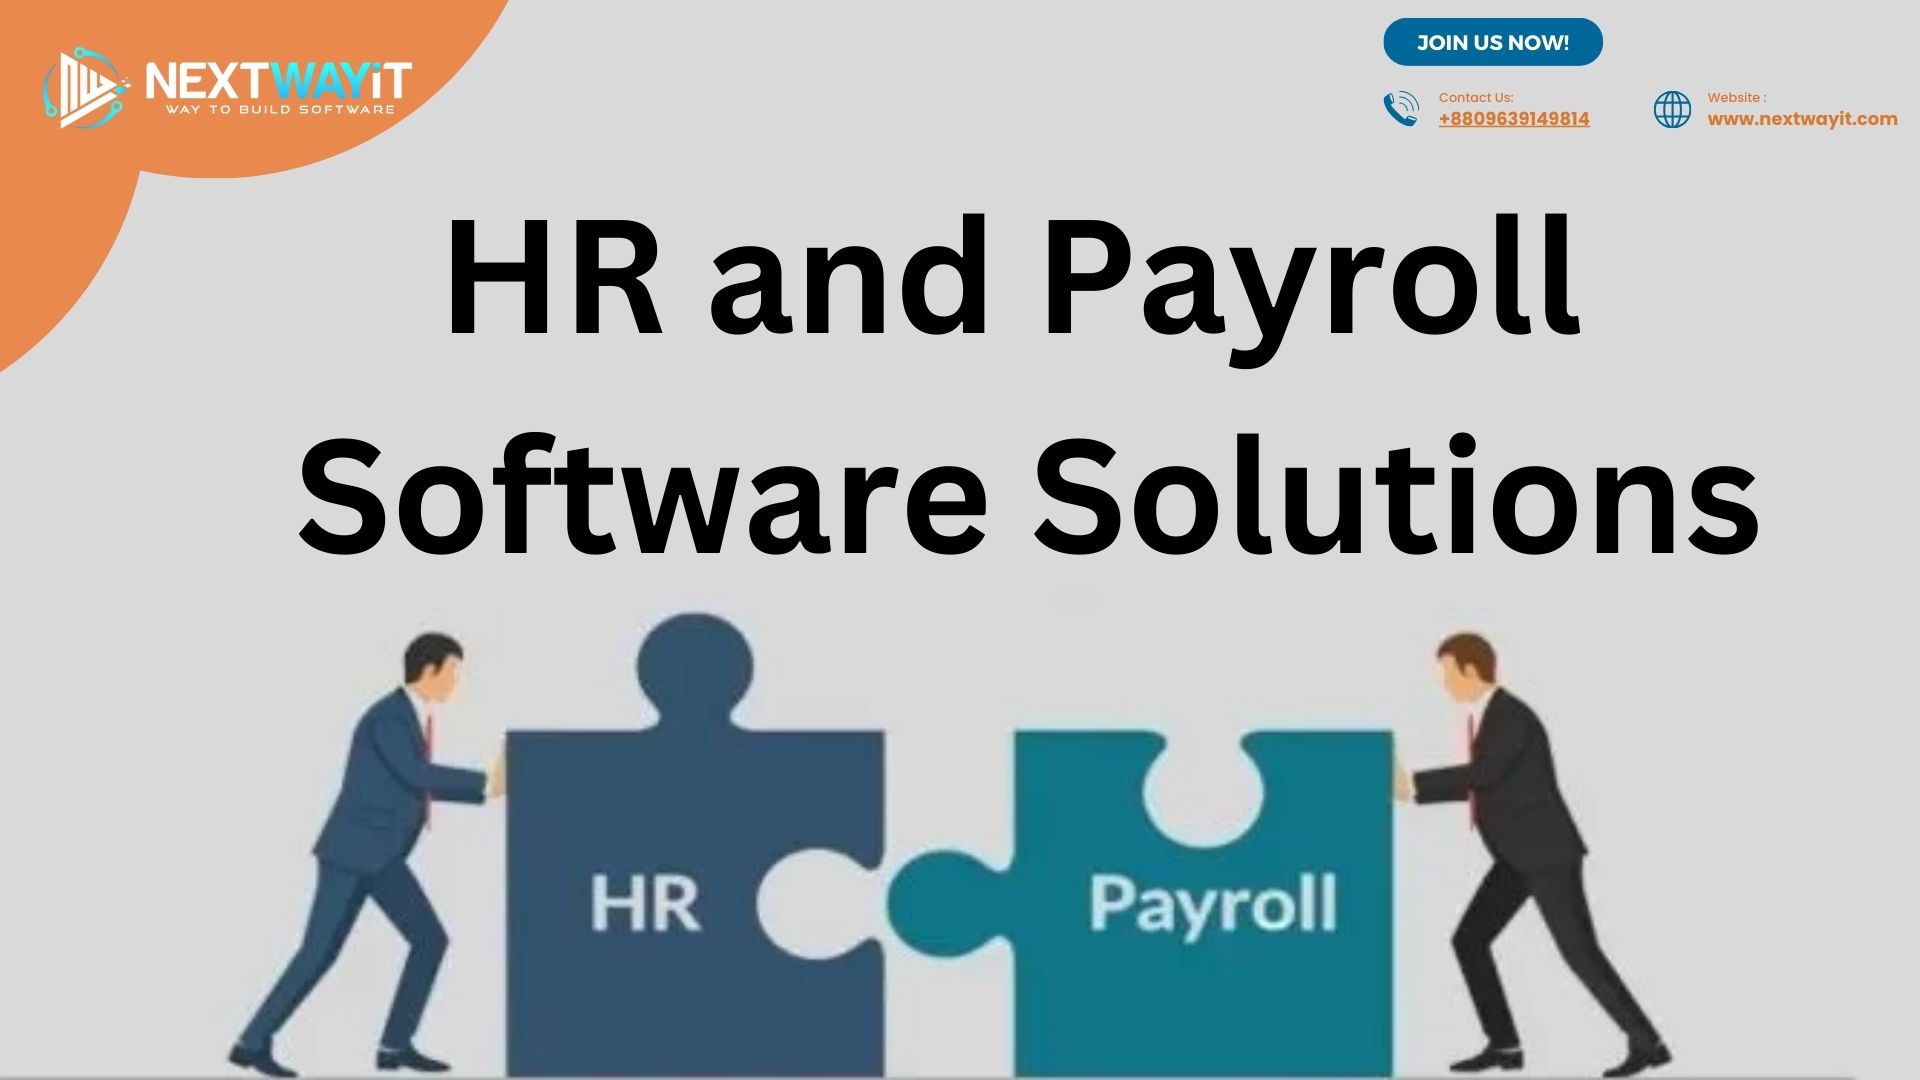 Best HR and Payroll Software Solutions